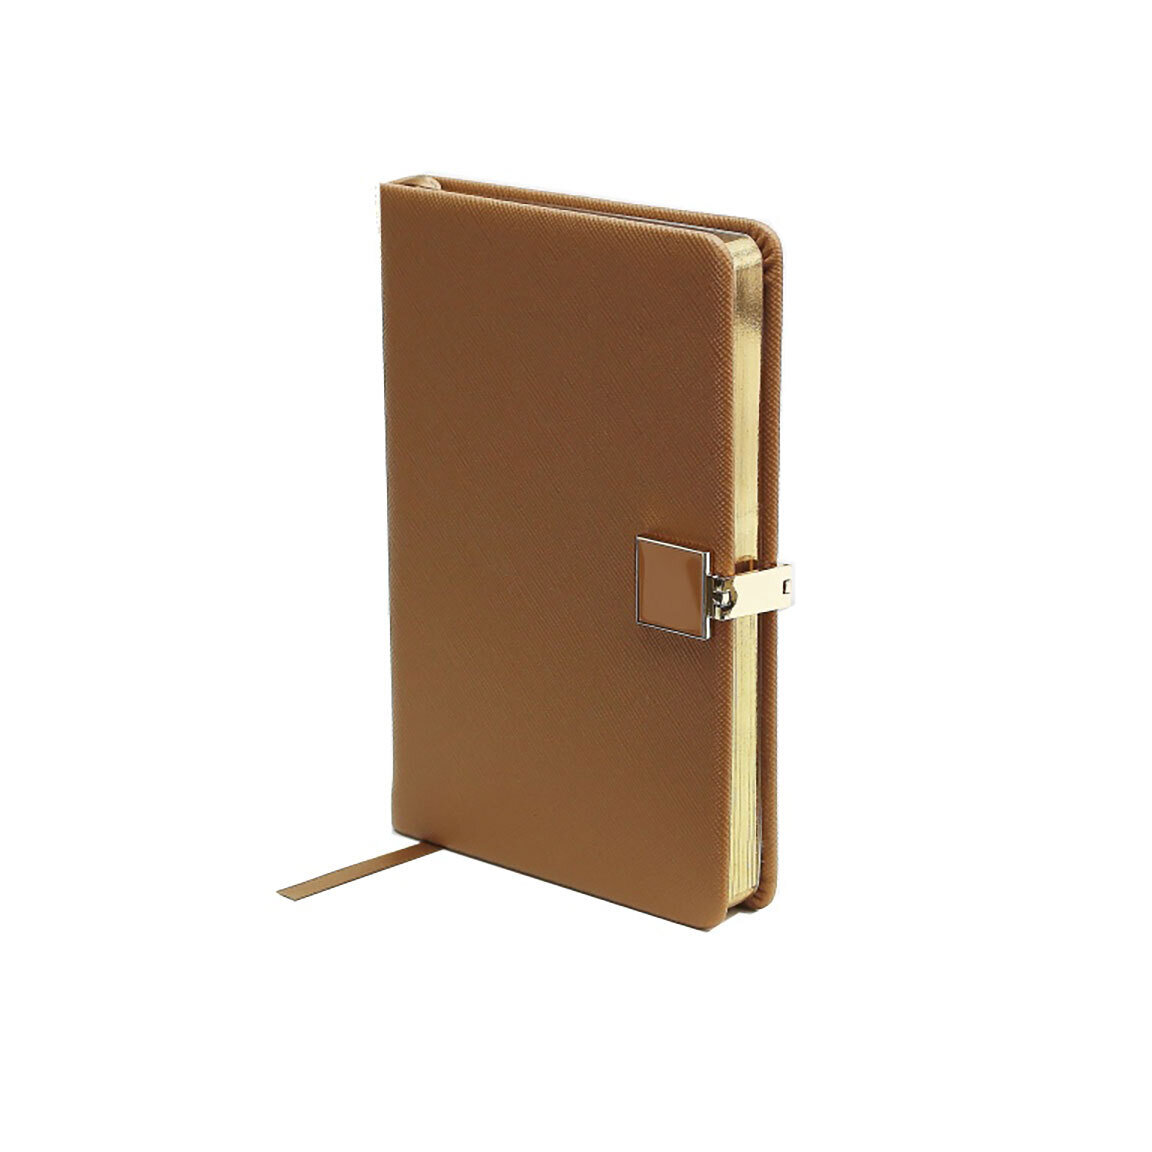 Addison Ross Tan & Gold A6 Notebook A6 Inch Pu Leather NB1201